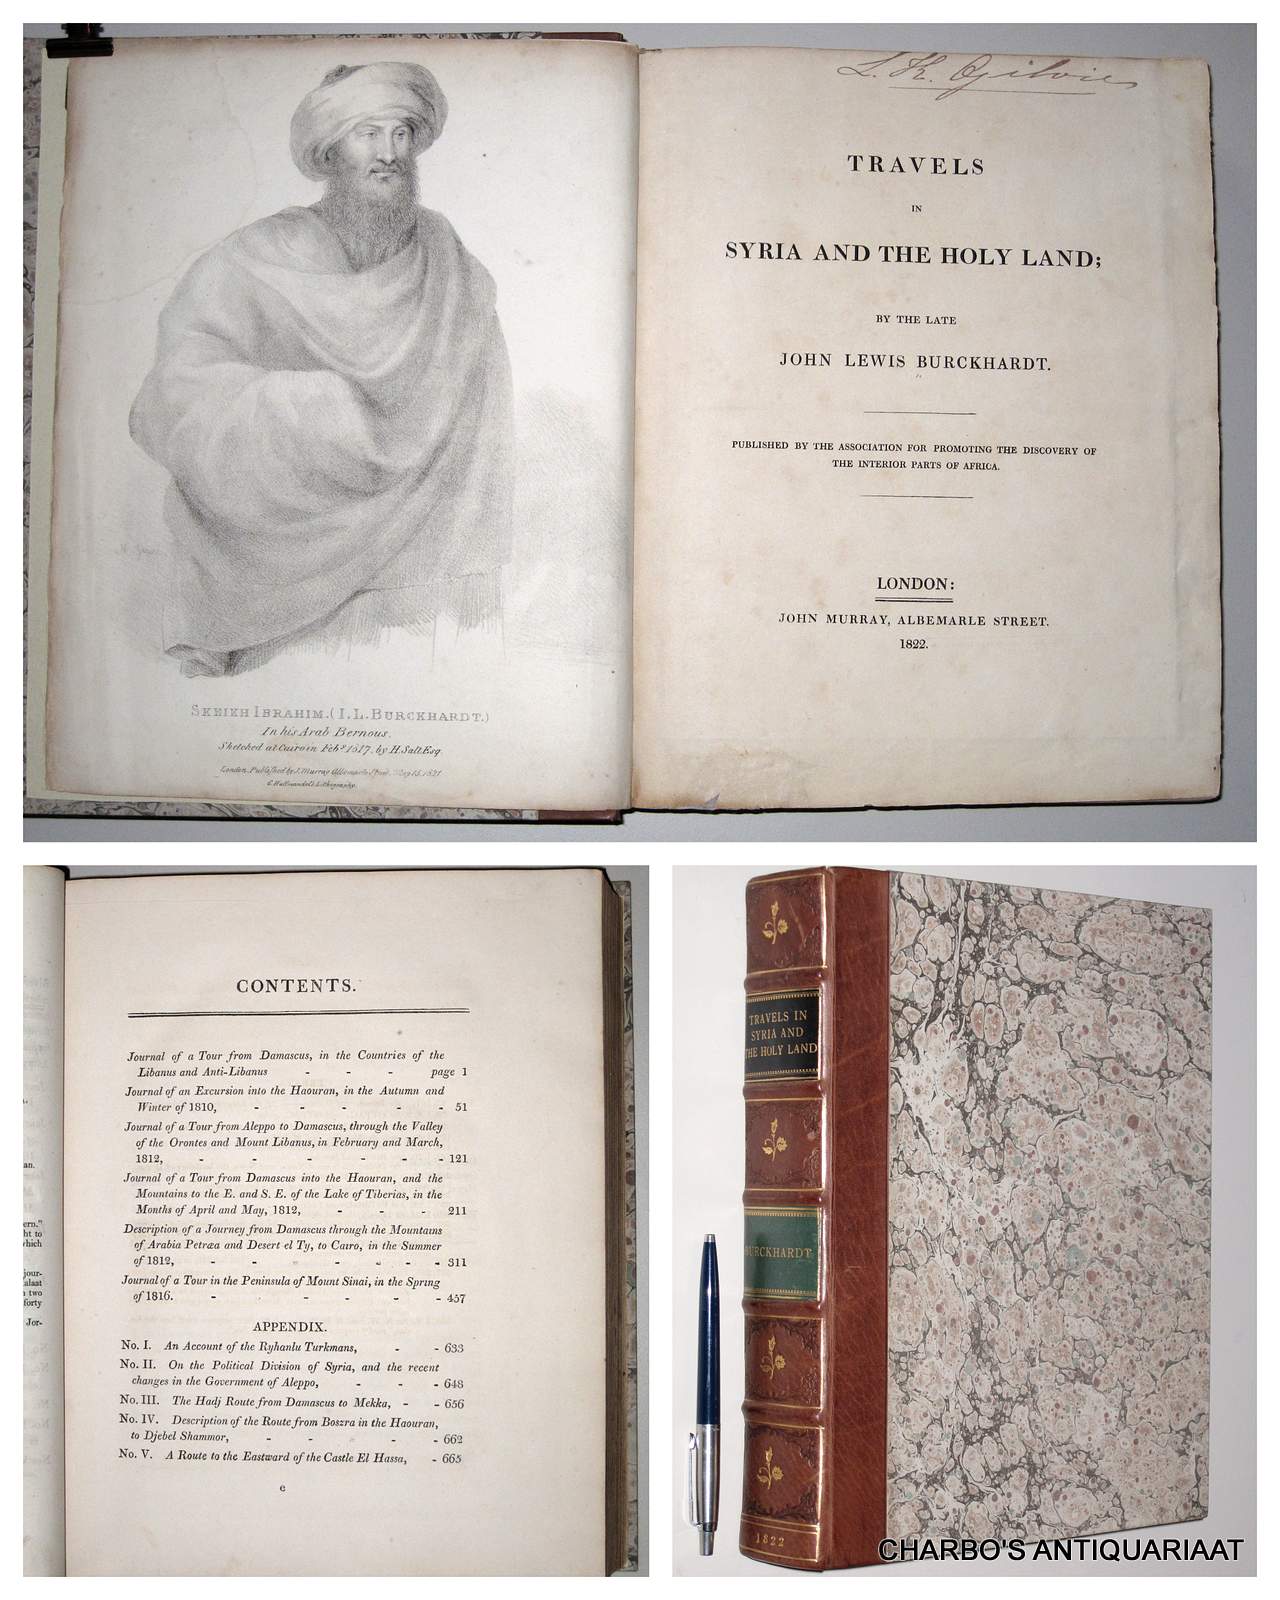 BURCKHARDT, JOHN LEWIS, -  Travels in Syria and the Holy Land, by the late John Lewis Burckhardt. Published by the Association for promoting the discovery of the interior parts of Africa.